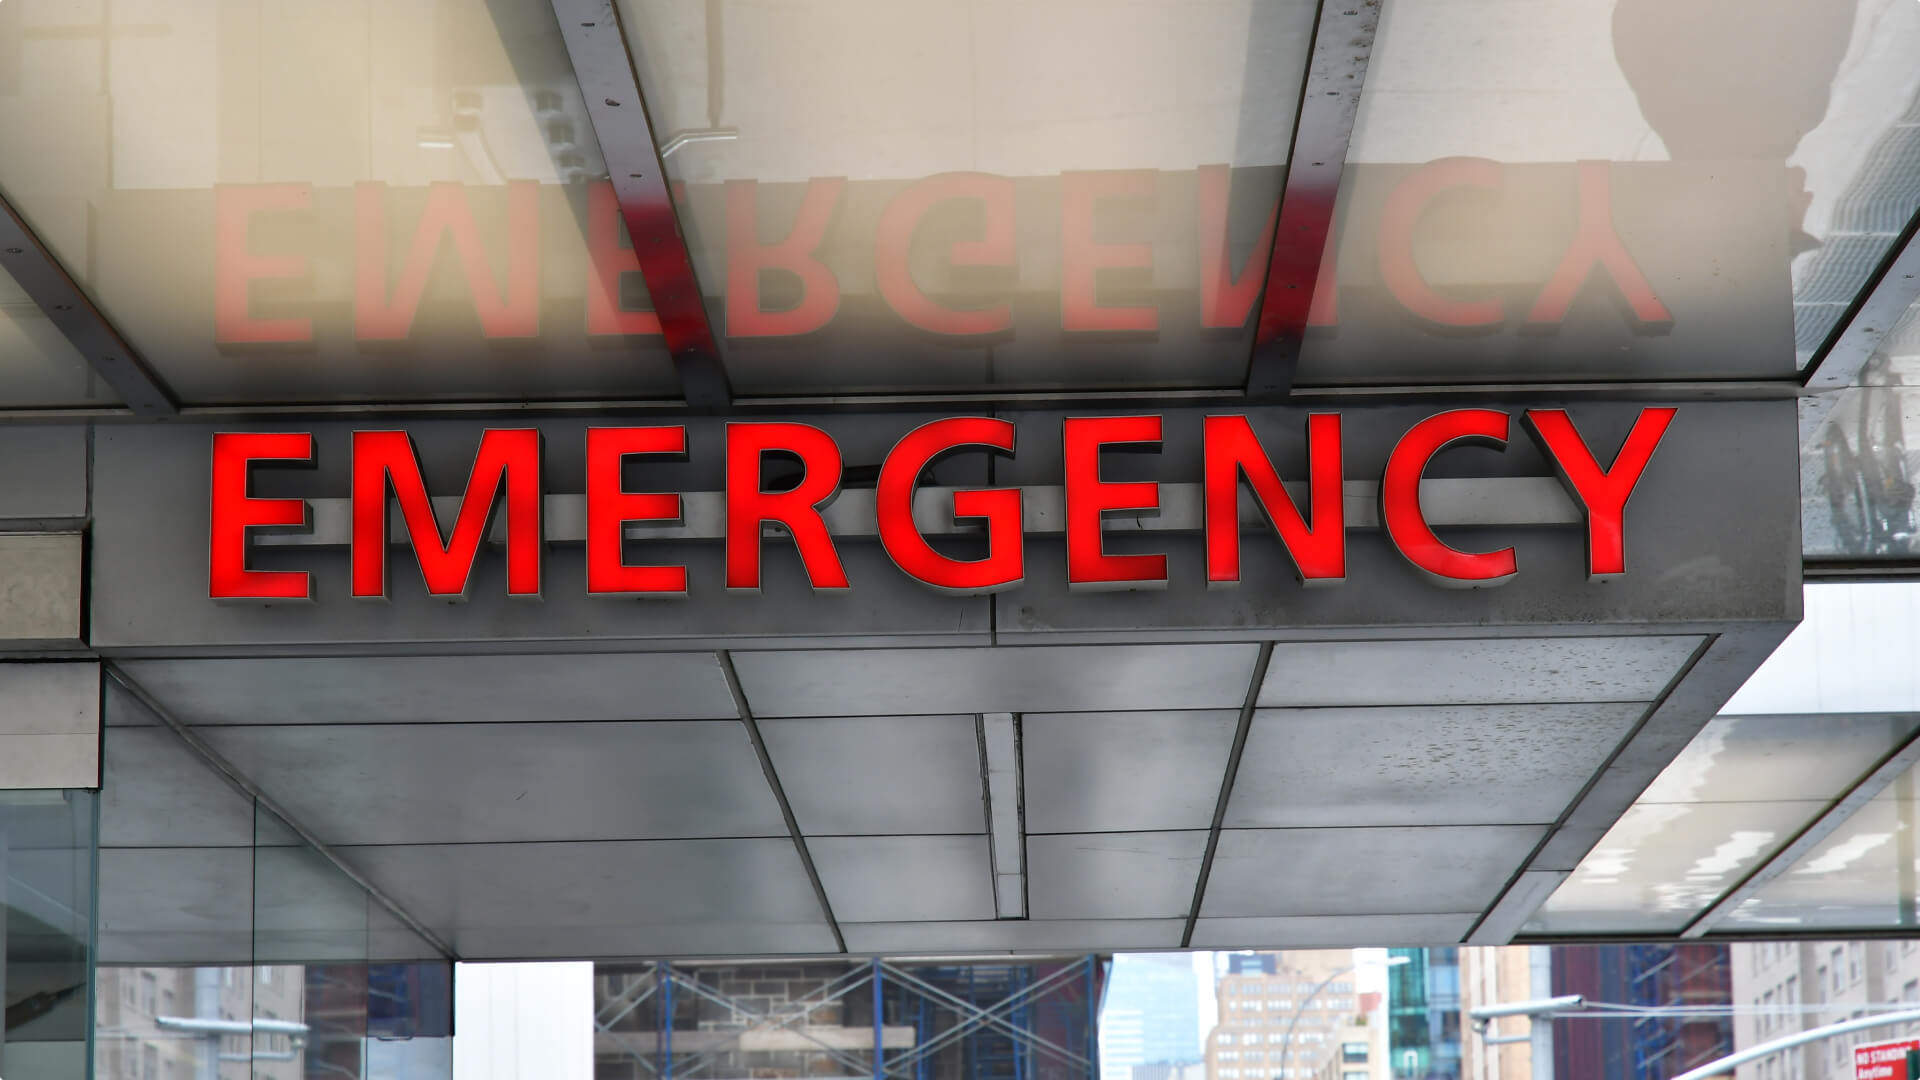 The word 'EMERGENCY' in bold red letters is affixed to the facade of a building, likely indicating the entrance to an emergency room or department, with its reflection visible on a glass surface above.